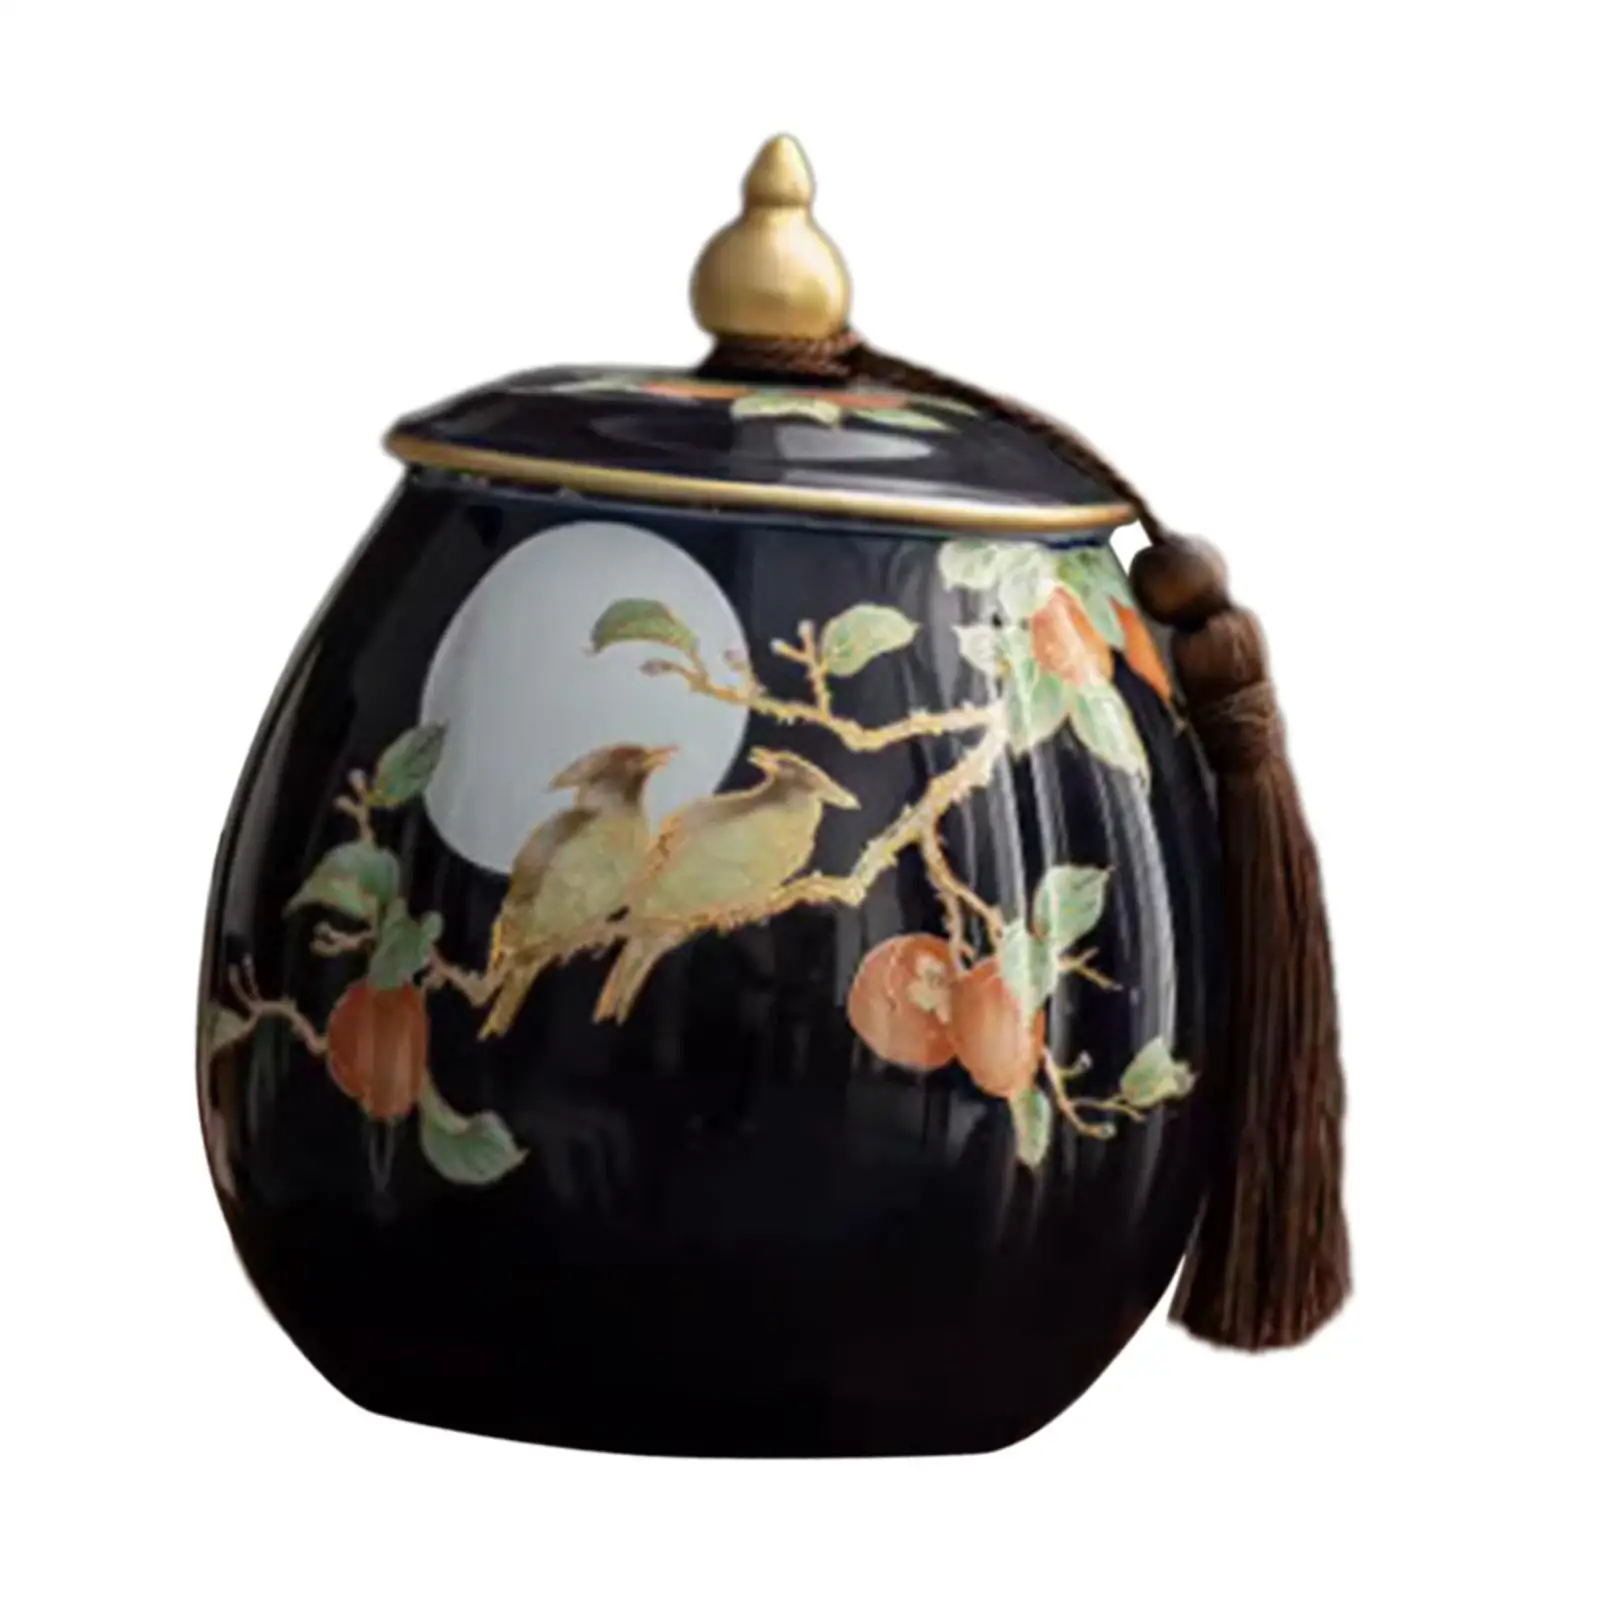 Tea Storage Container Chinese Ceramic Tea Canister for Sugar Coffee Decor